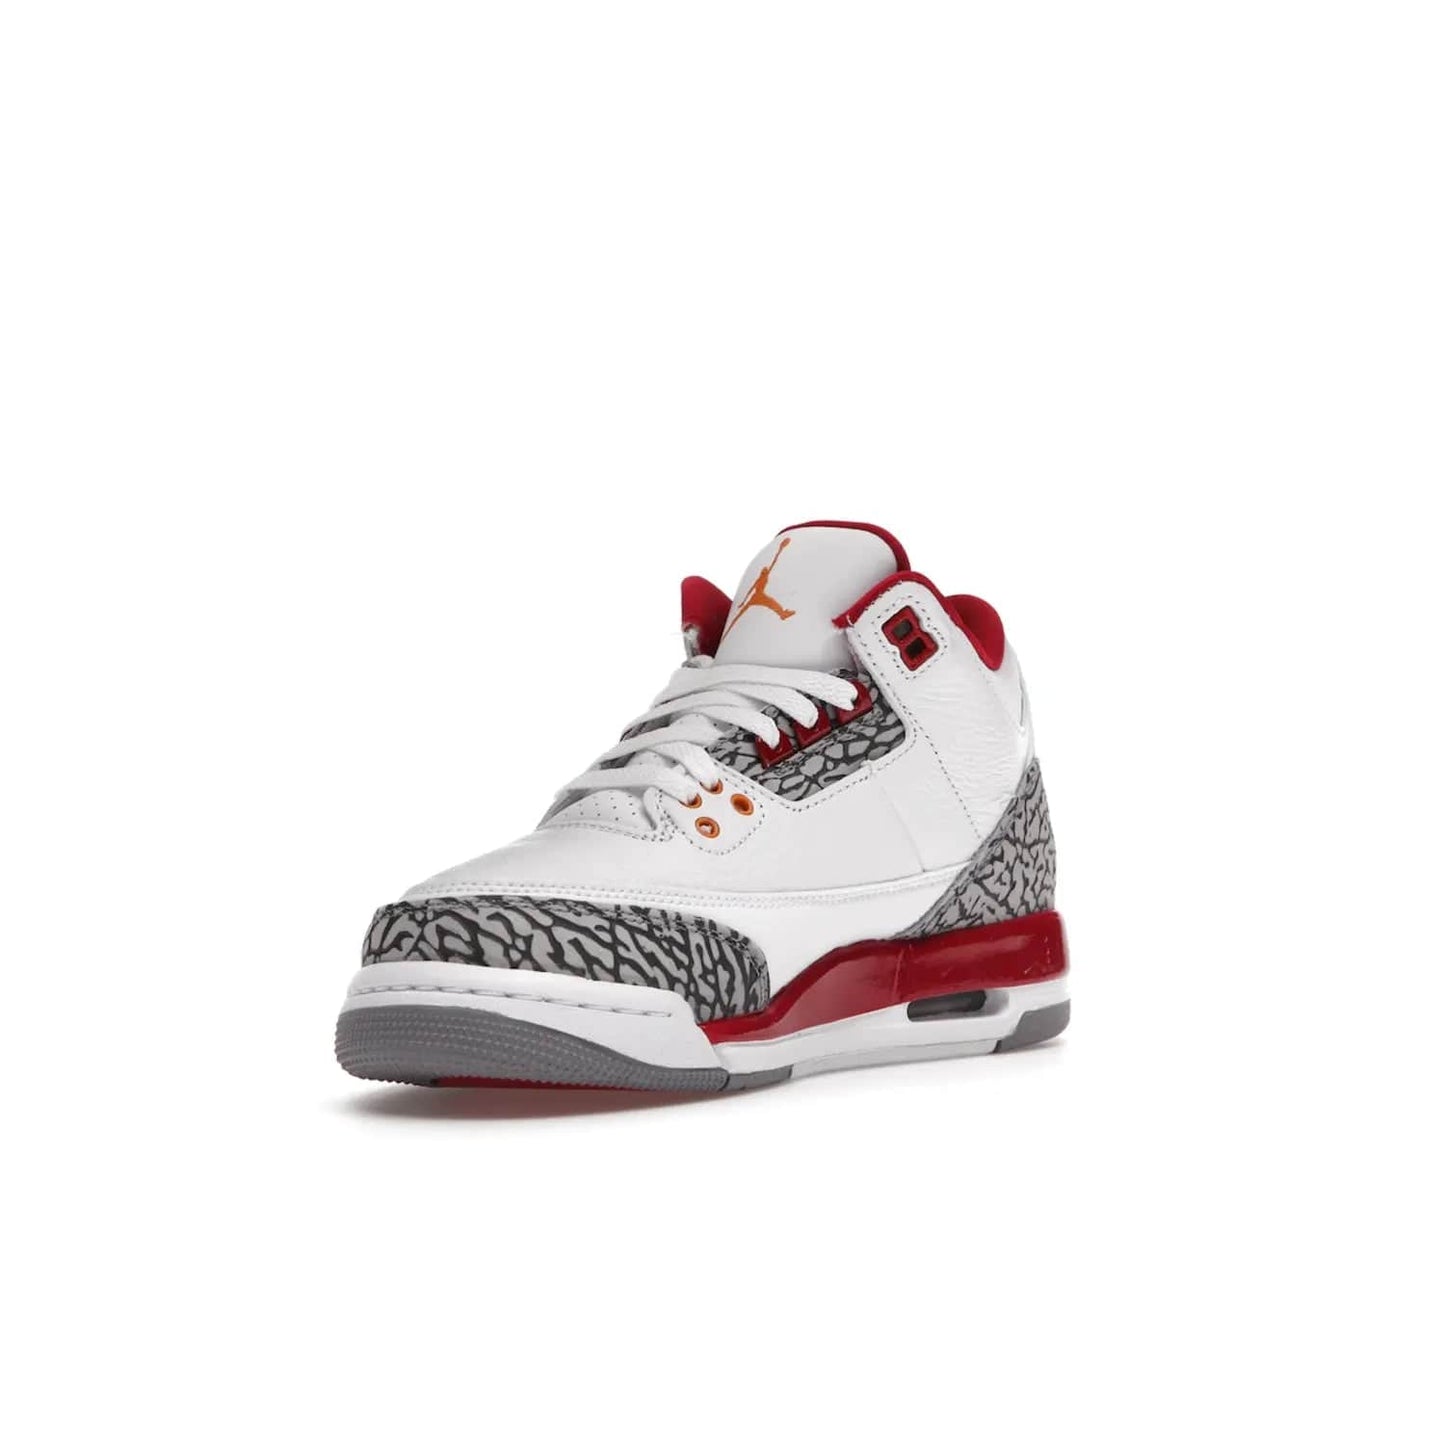 Jordan 3 Retro Cardinal (GS) - Image 14 - Only at www.BallersClubKickz.com - Shop the kid-sized Air Jordan 3 Retro Cardinal GS, released Feb 2022. White tumbled leather upper, light curry accenting, cement grey and classic red details throughout. Visible Air cushioning, midsole, and an eye-catching outsole. Show off your style with this fashionable streetwear silhouette.